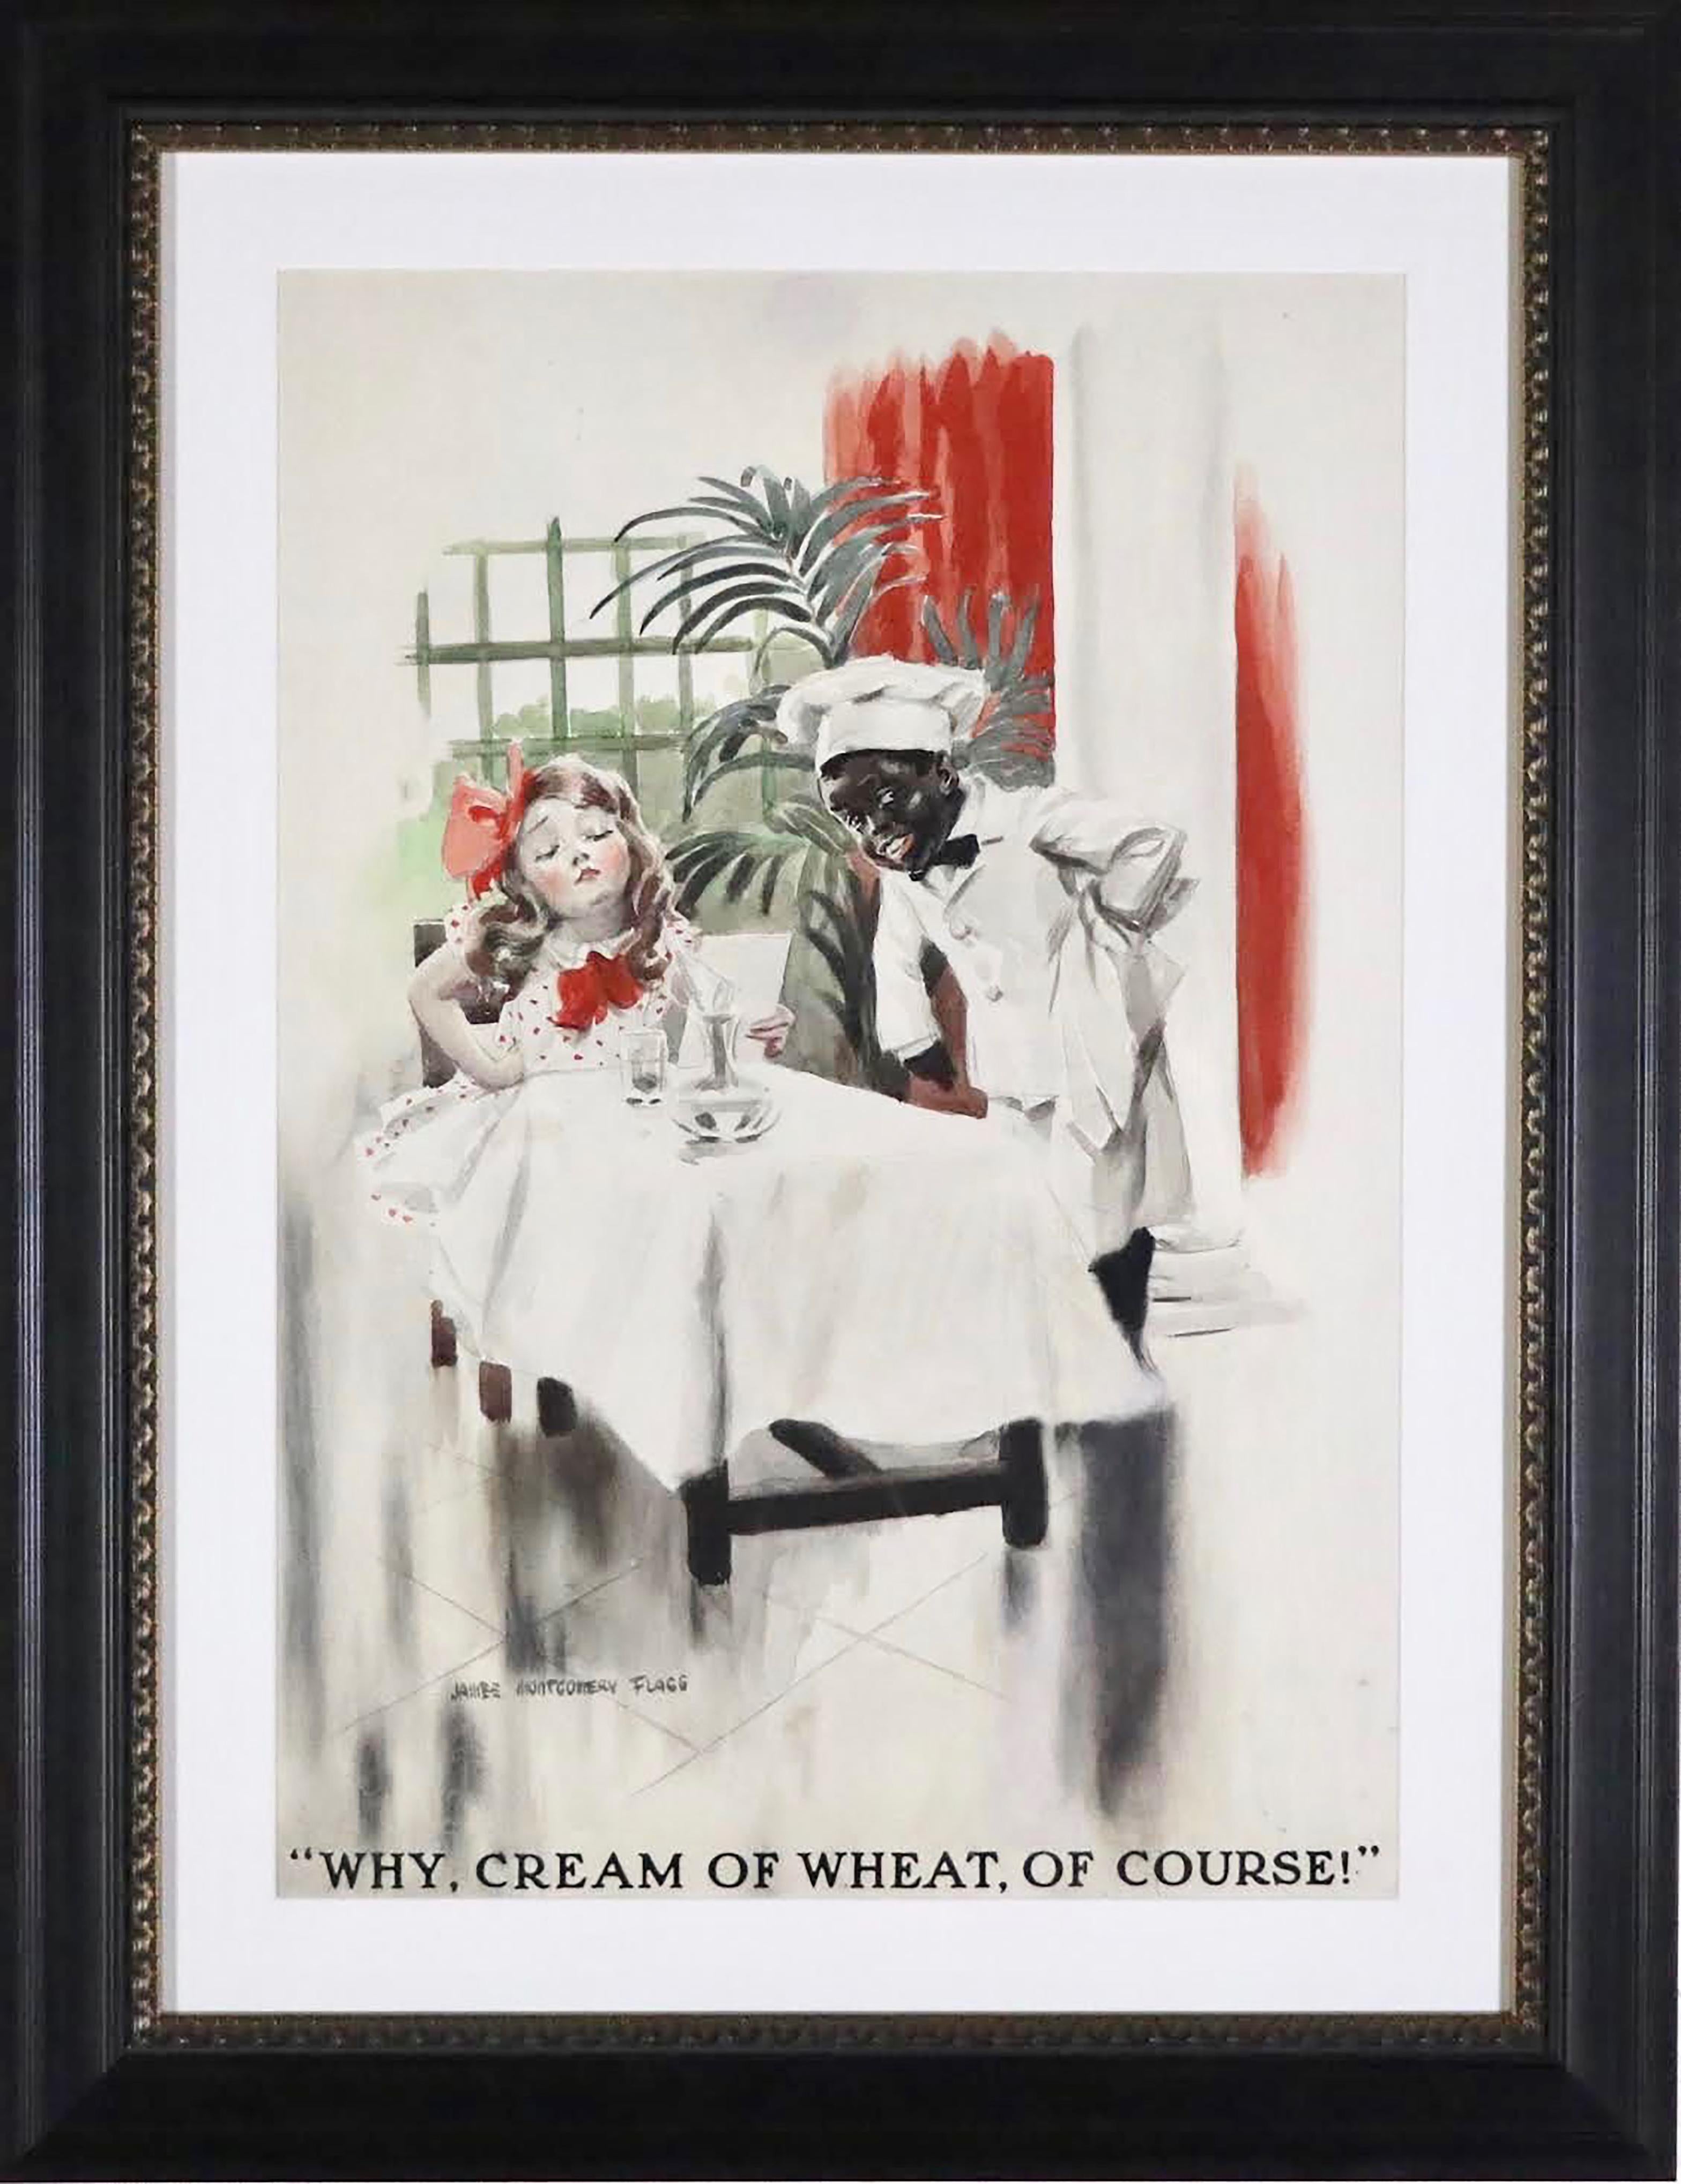 Cream of Wheat Ad - Art by James Montgomery Flagg